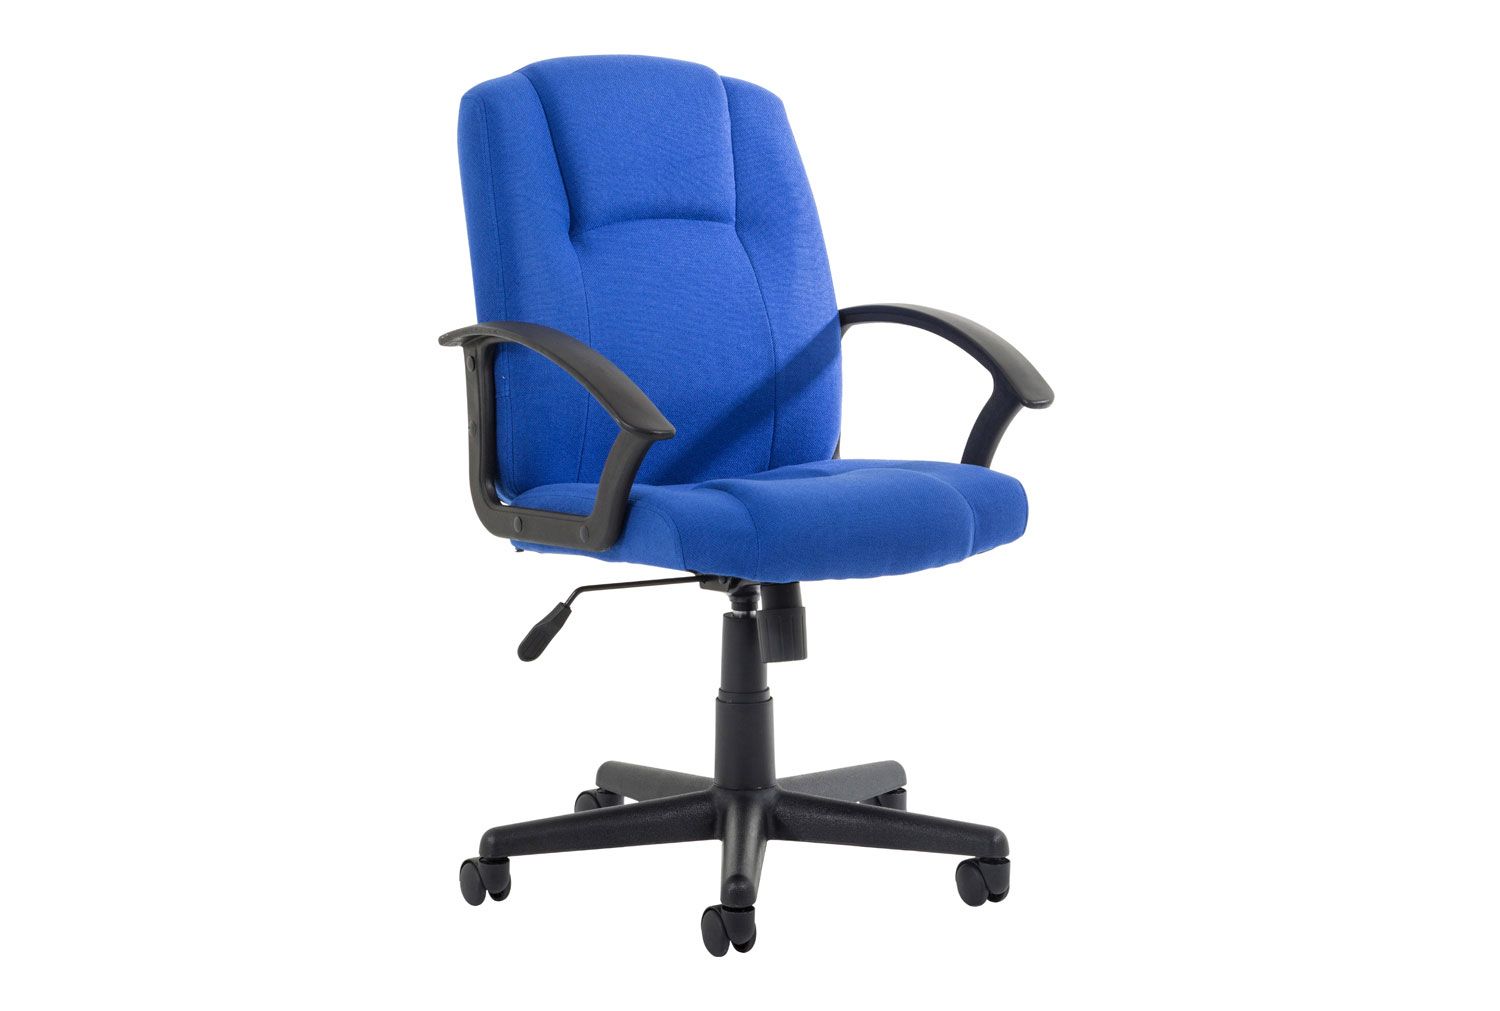 Dream Medium Back Fabric Executive Office Chair (Blue), Express Delivery